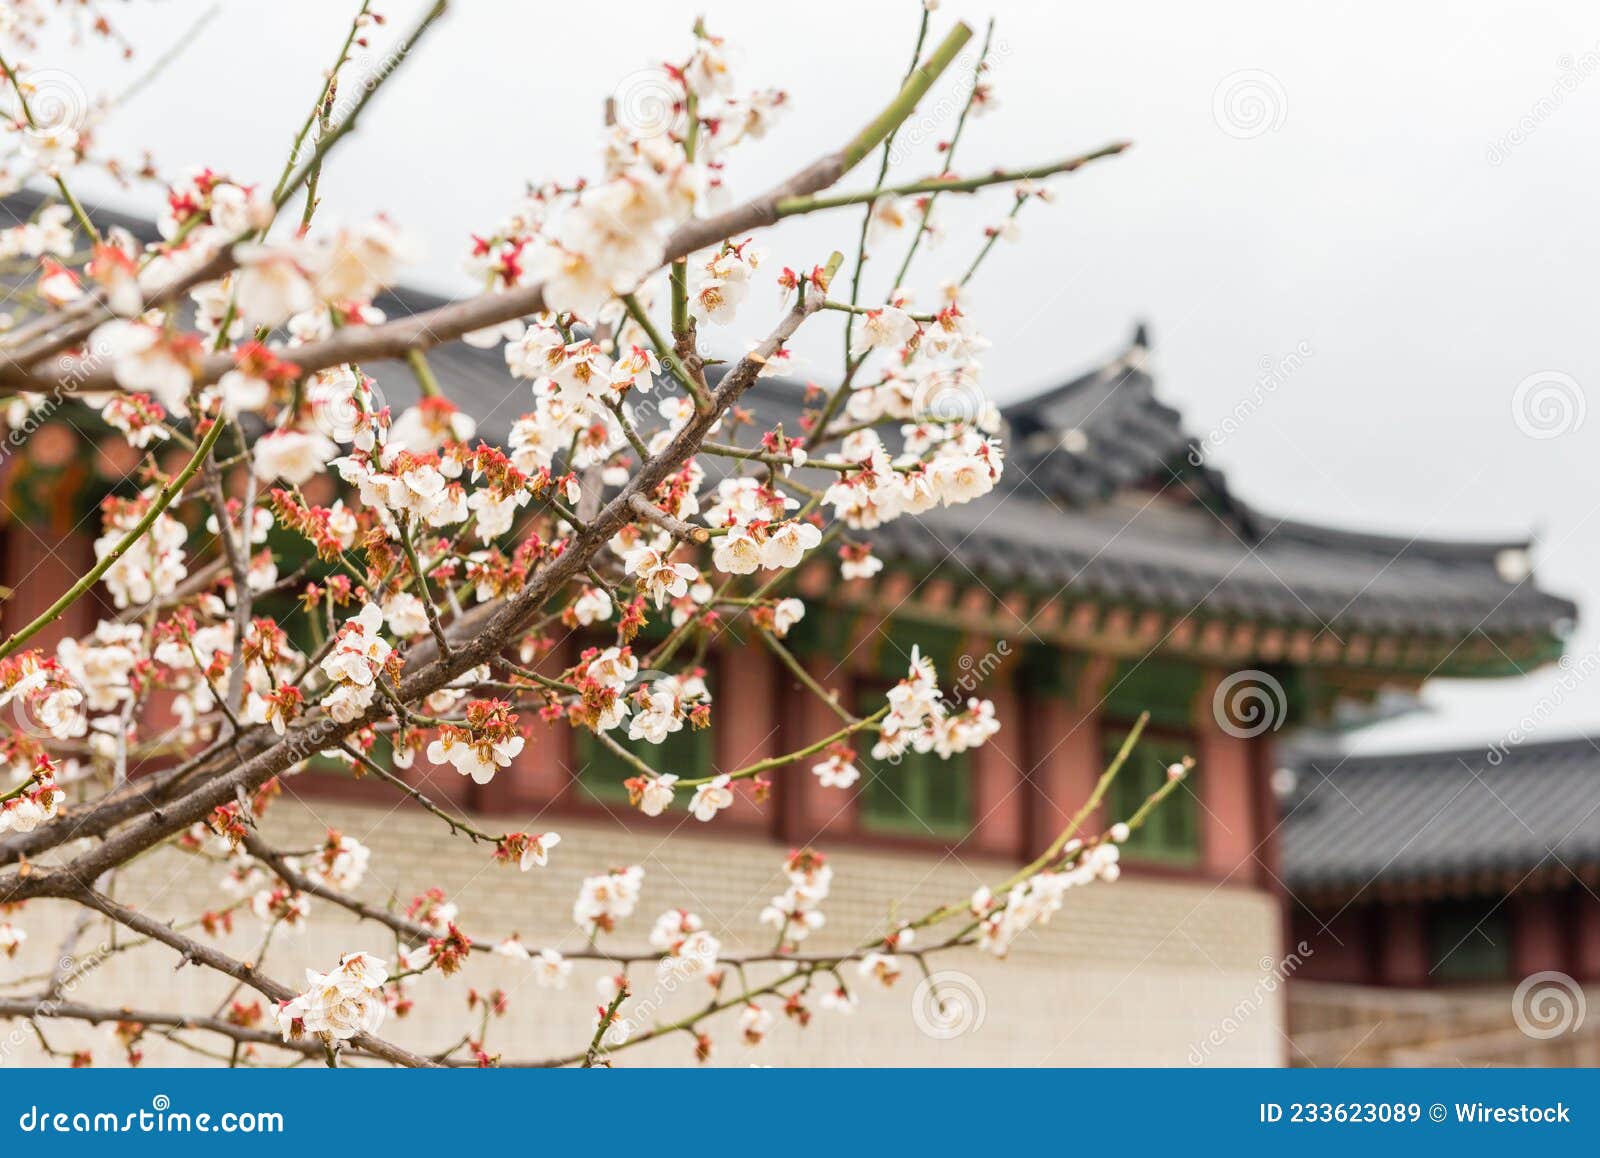 cherry blossoms branches in a garden at seoul, south korea